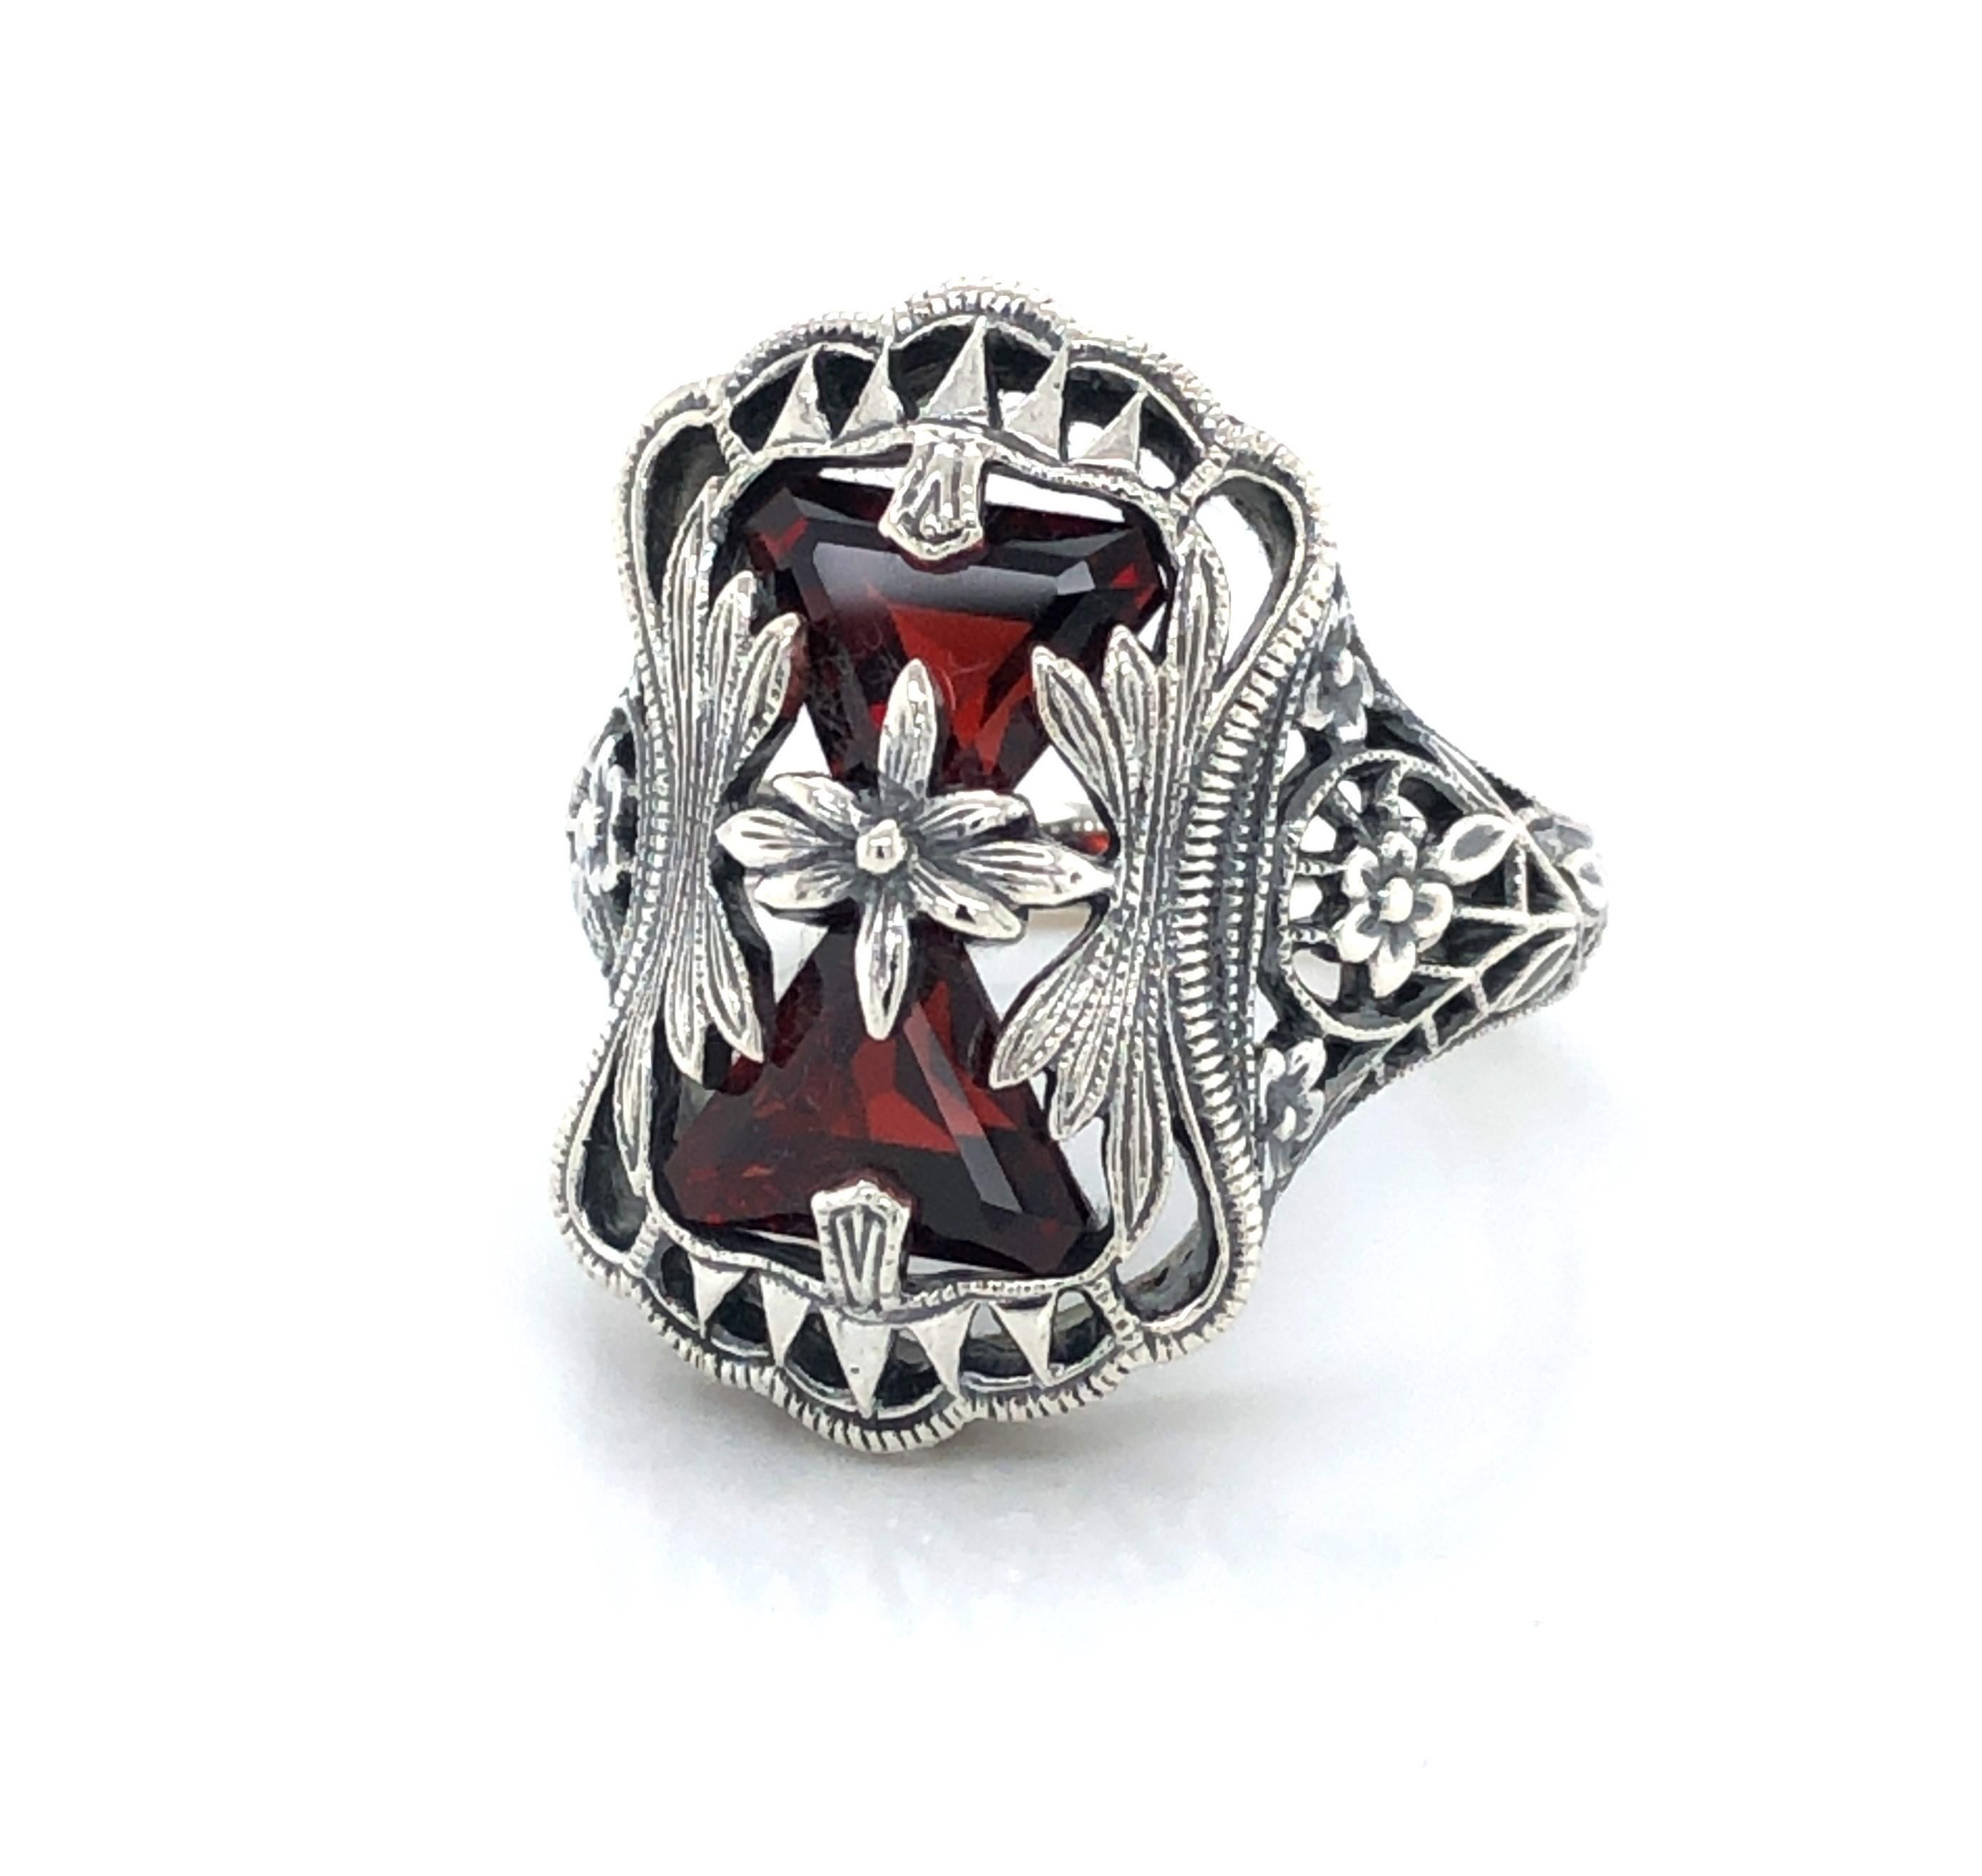 Two red garnet trillions, approximately one carat total weight, give this  beautiful antique inspired floral and vine sterling silver filigree ring it's rich look. The ornate ring head measures a generous 7/8 tall by approximately 1/2 inch wide.